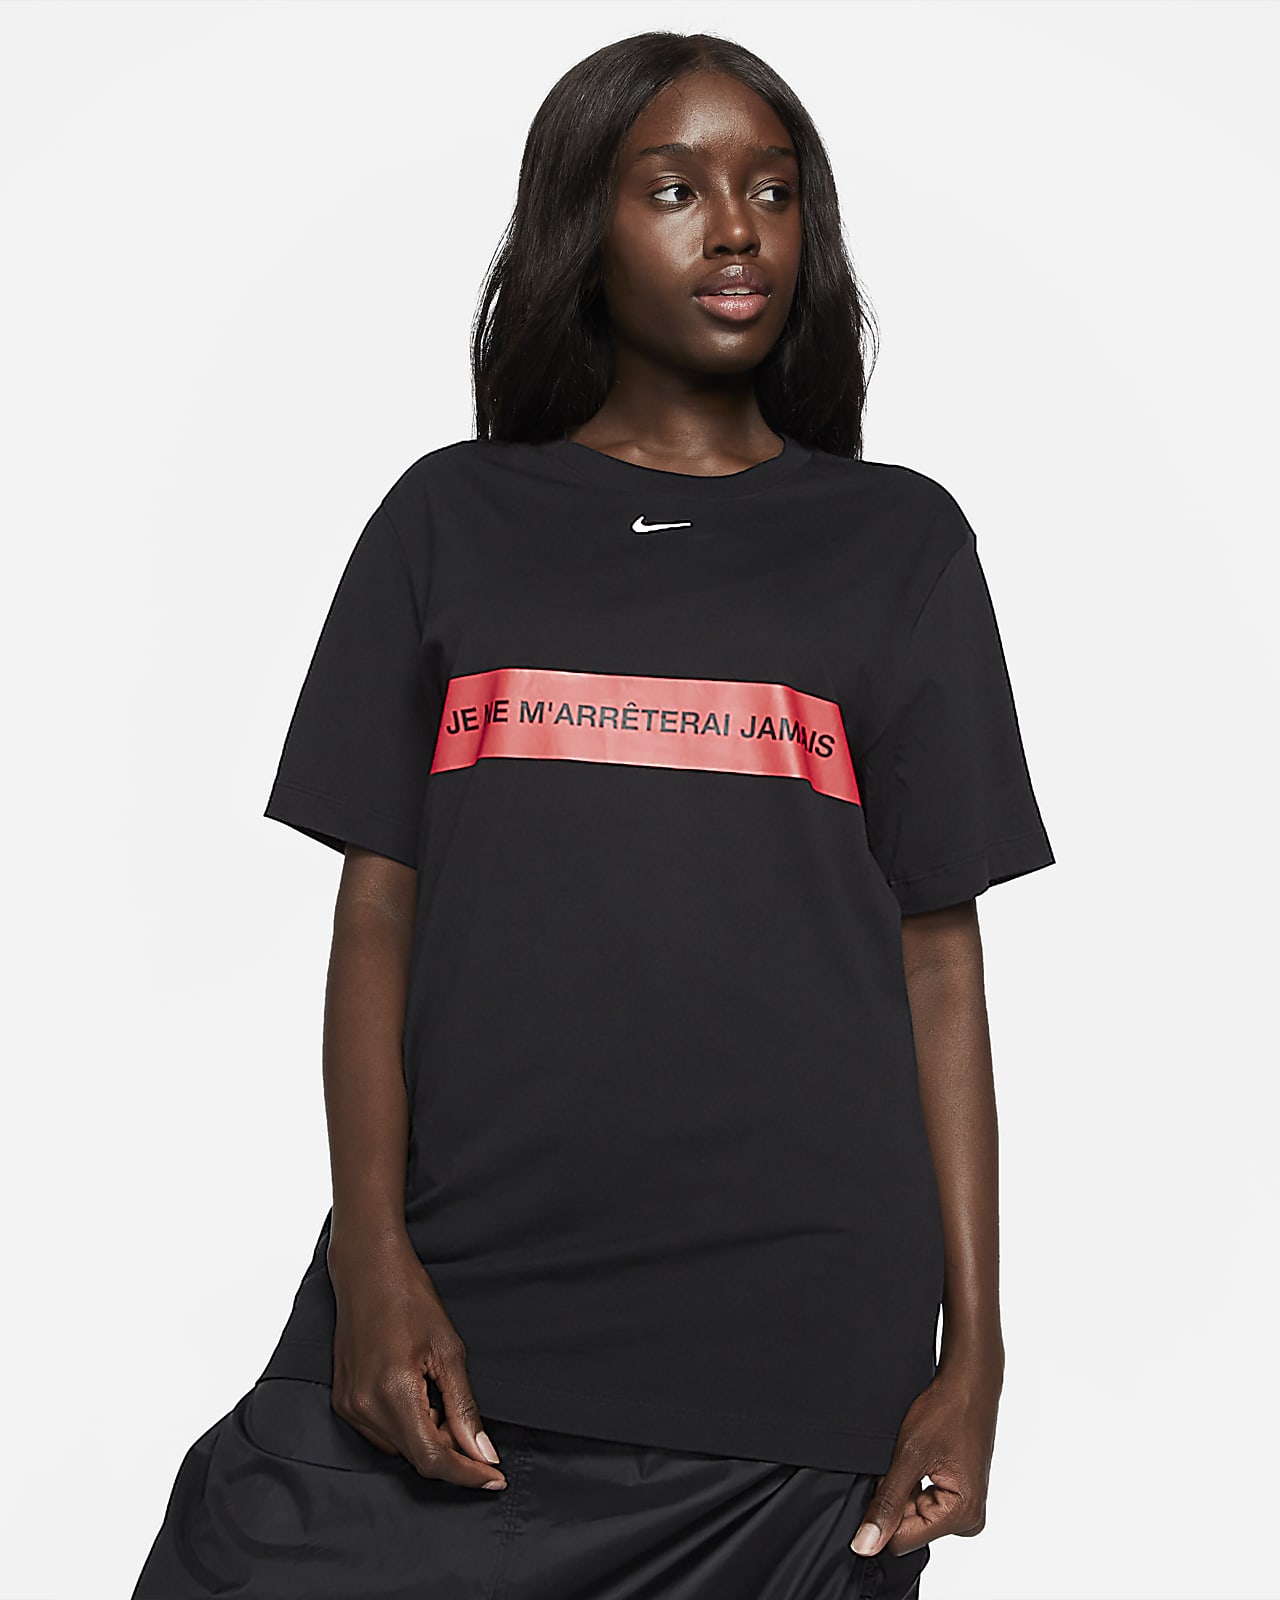 Clerk Be excited Installation Nike Serena Williams Shirt Spain, SAVE 44% - www.fourwoodcapital.com